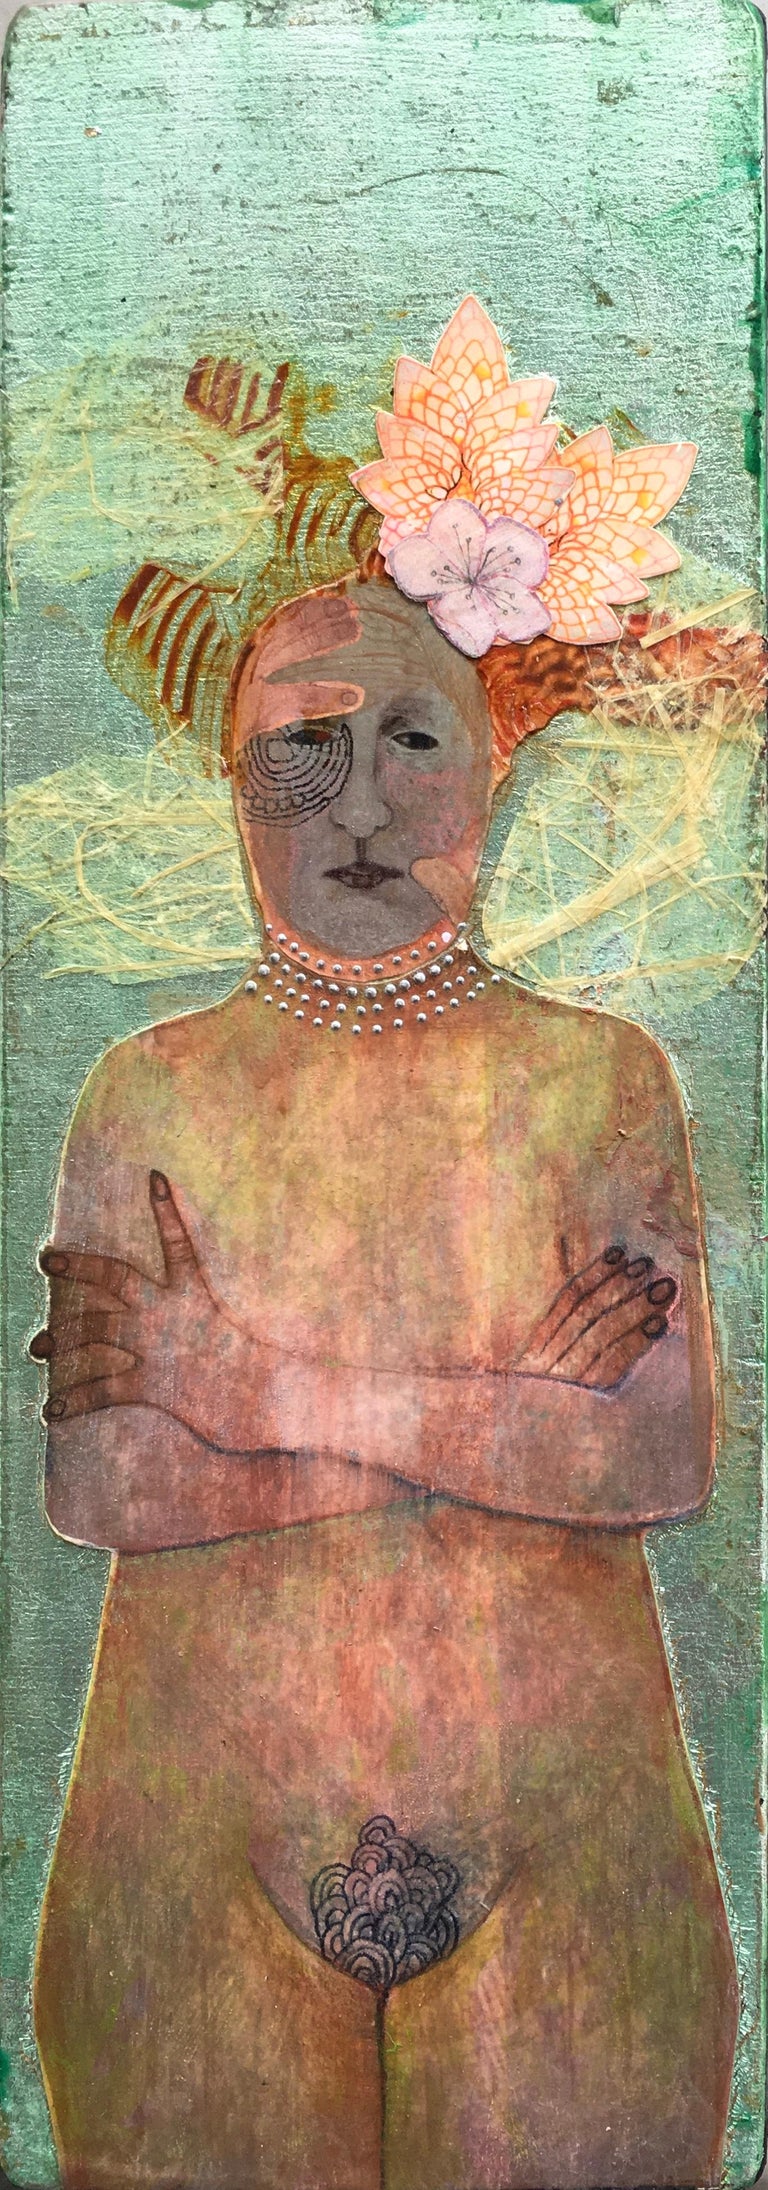 Deirdre O'Connell Figurative Painting - Guard, nude portrait of woman with floral headpiece, green, mixed media on panel